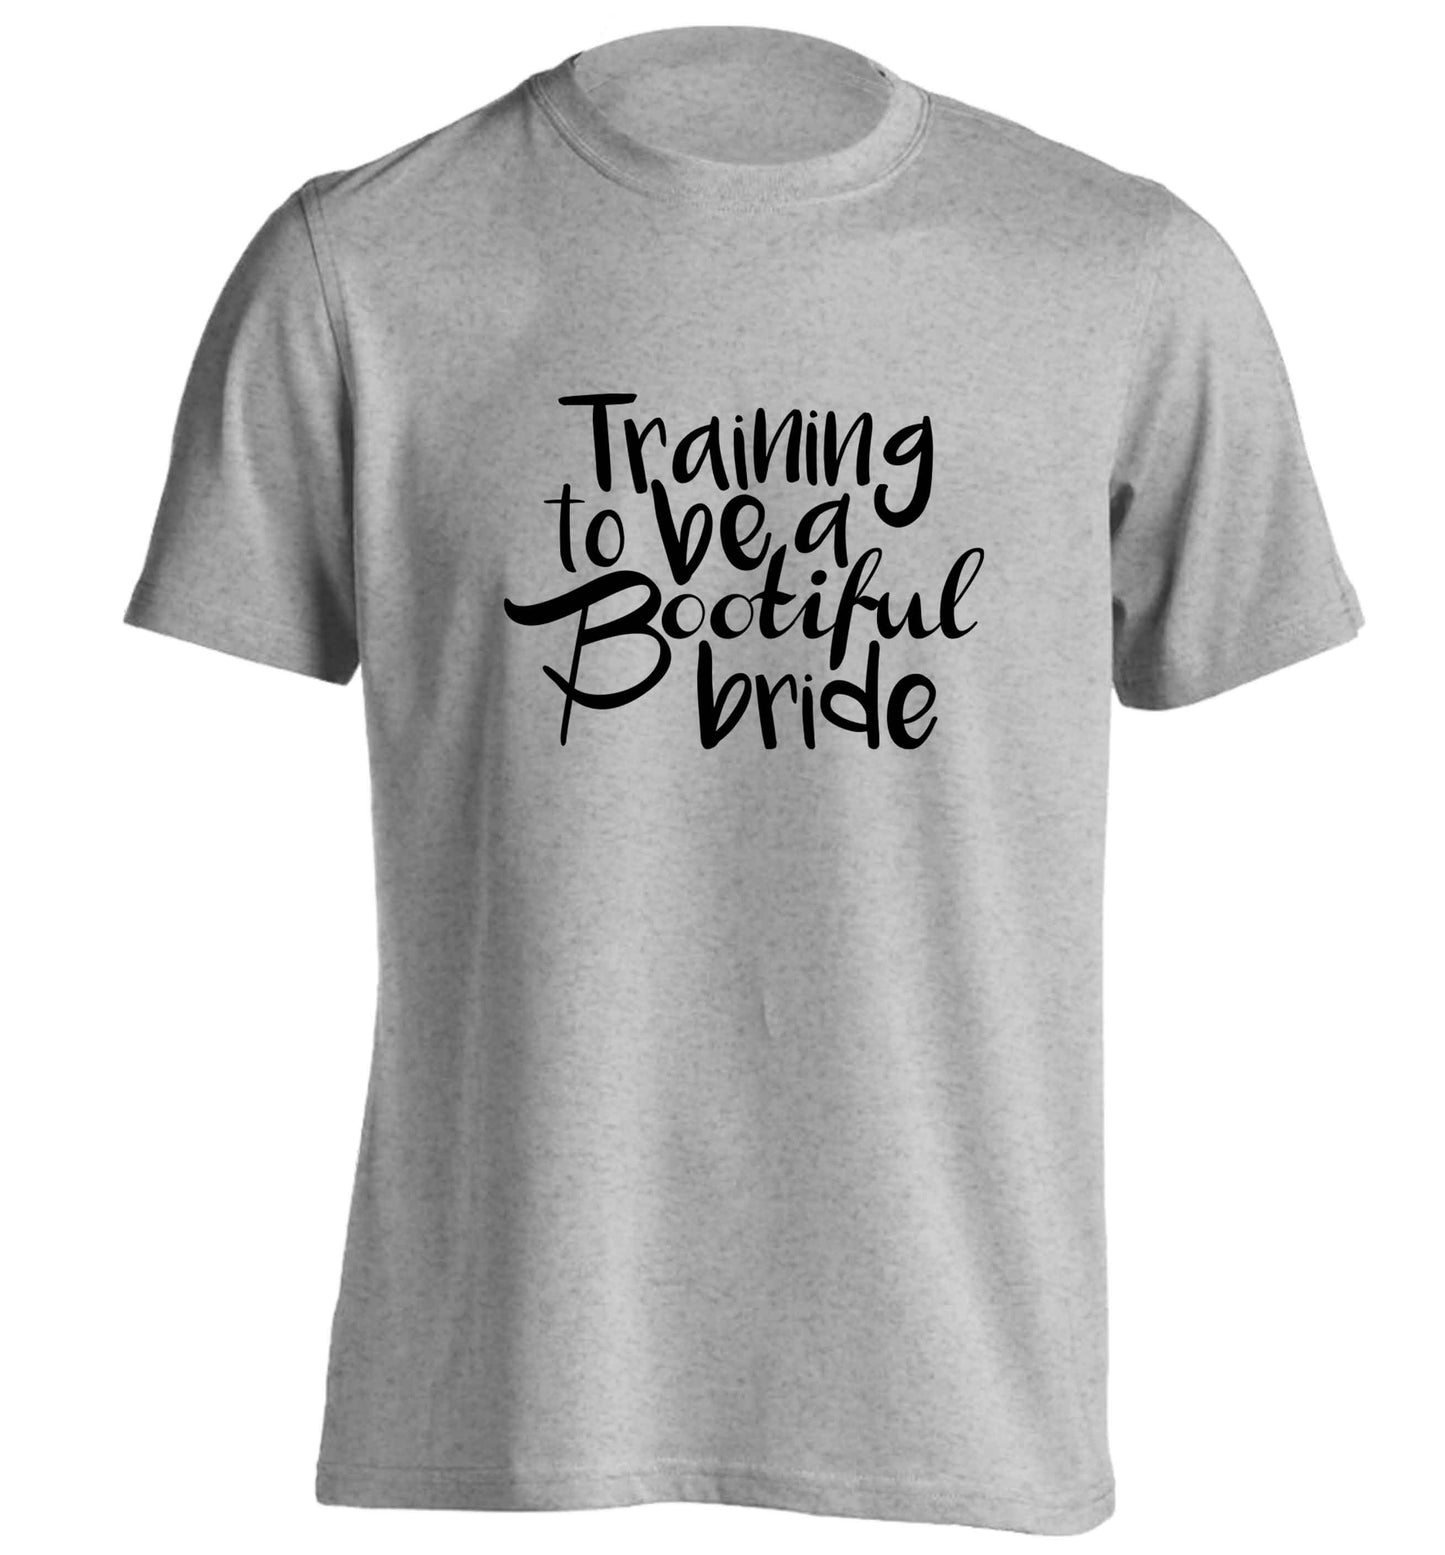 Get motivated and get fit for your big day! Our workout quotes and designs will get you ready to sweat! Perfect for any bride, groom or bridesmaid to be!  adults unisex grey Tshirt 2XL